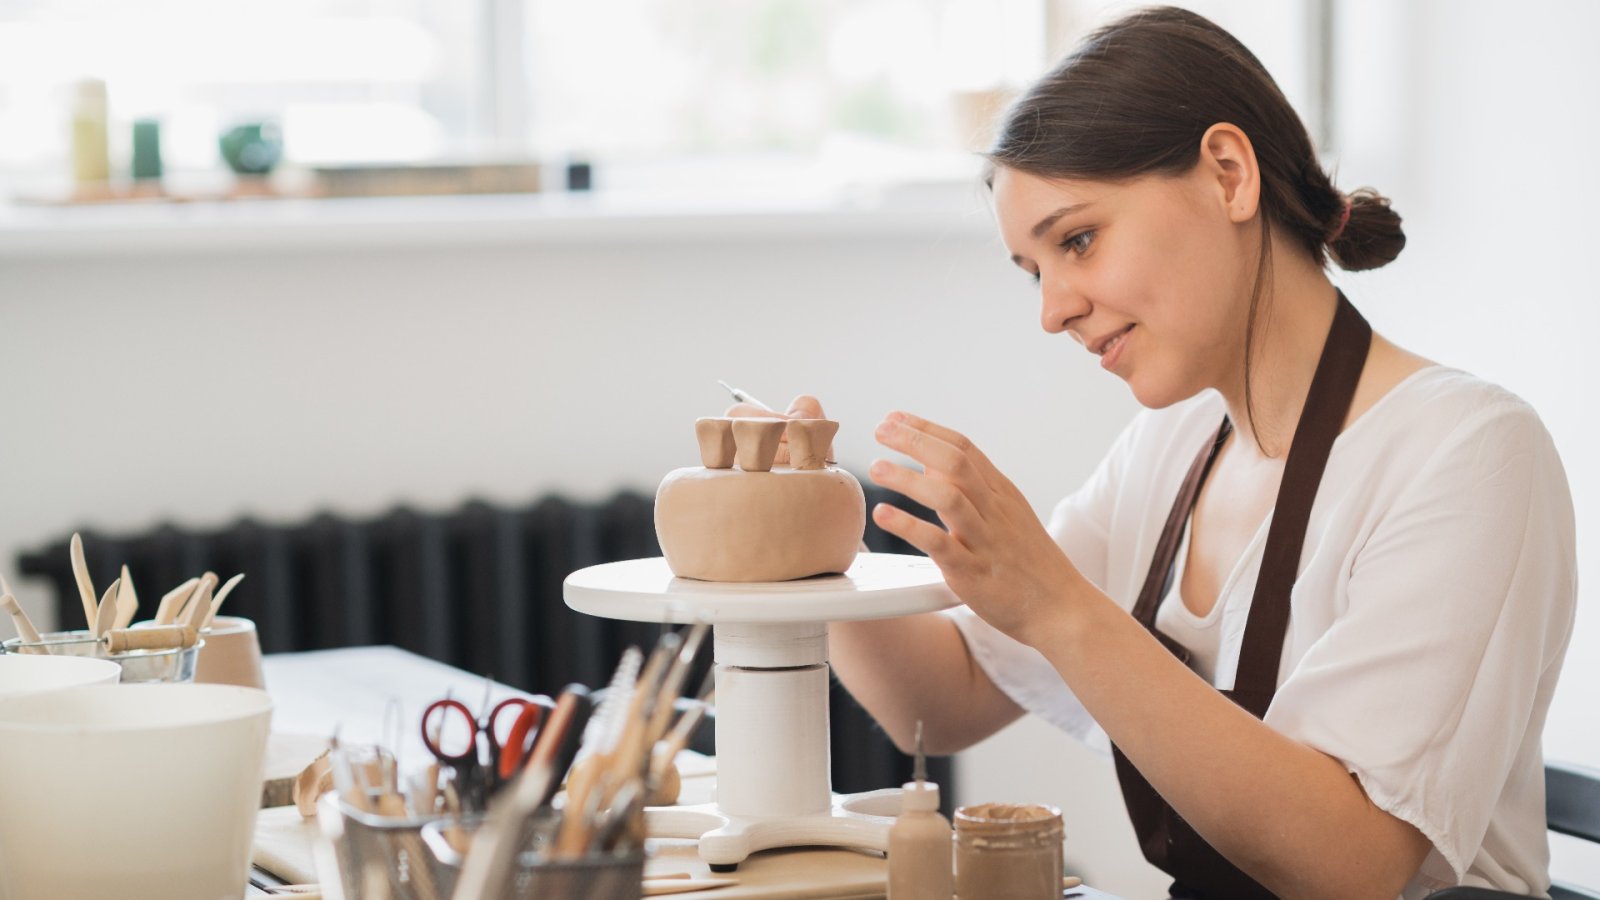 Your ceramics guide to simple, classic, and functional pottery